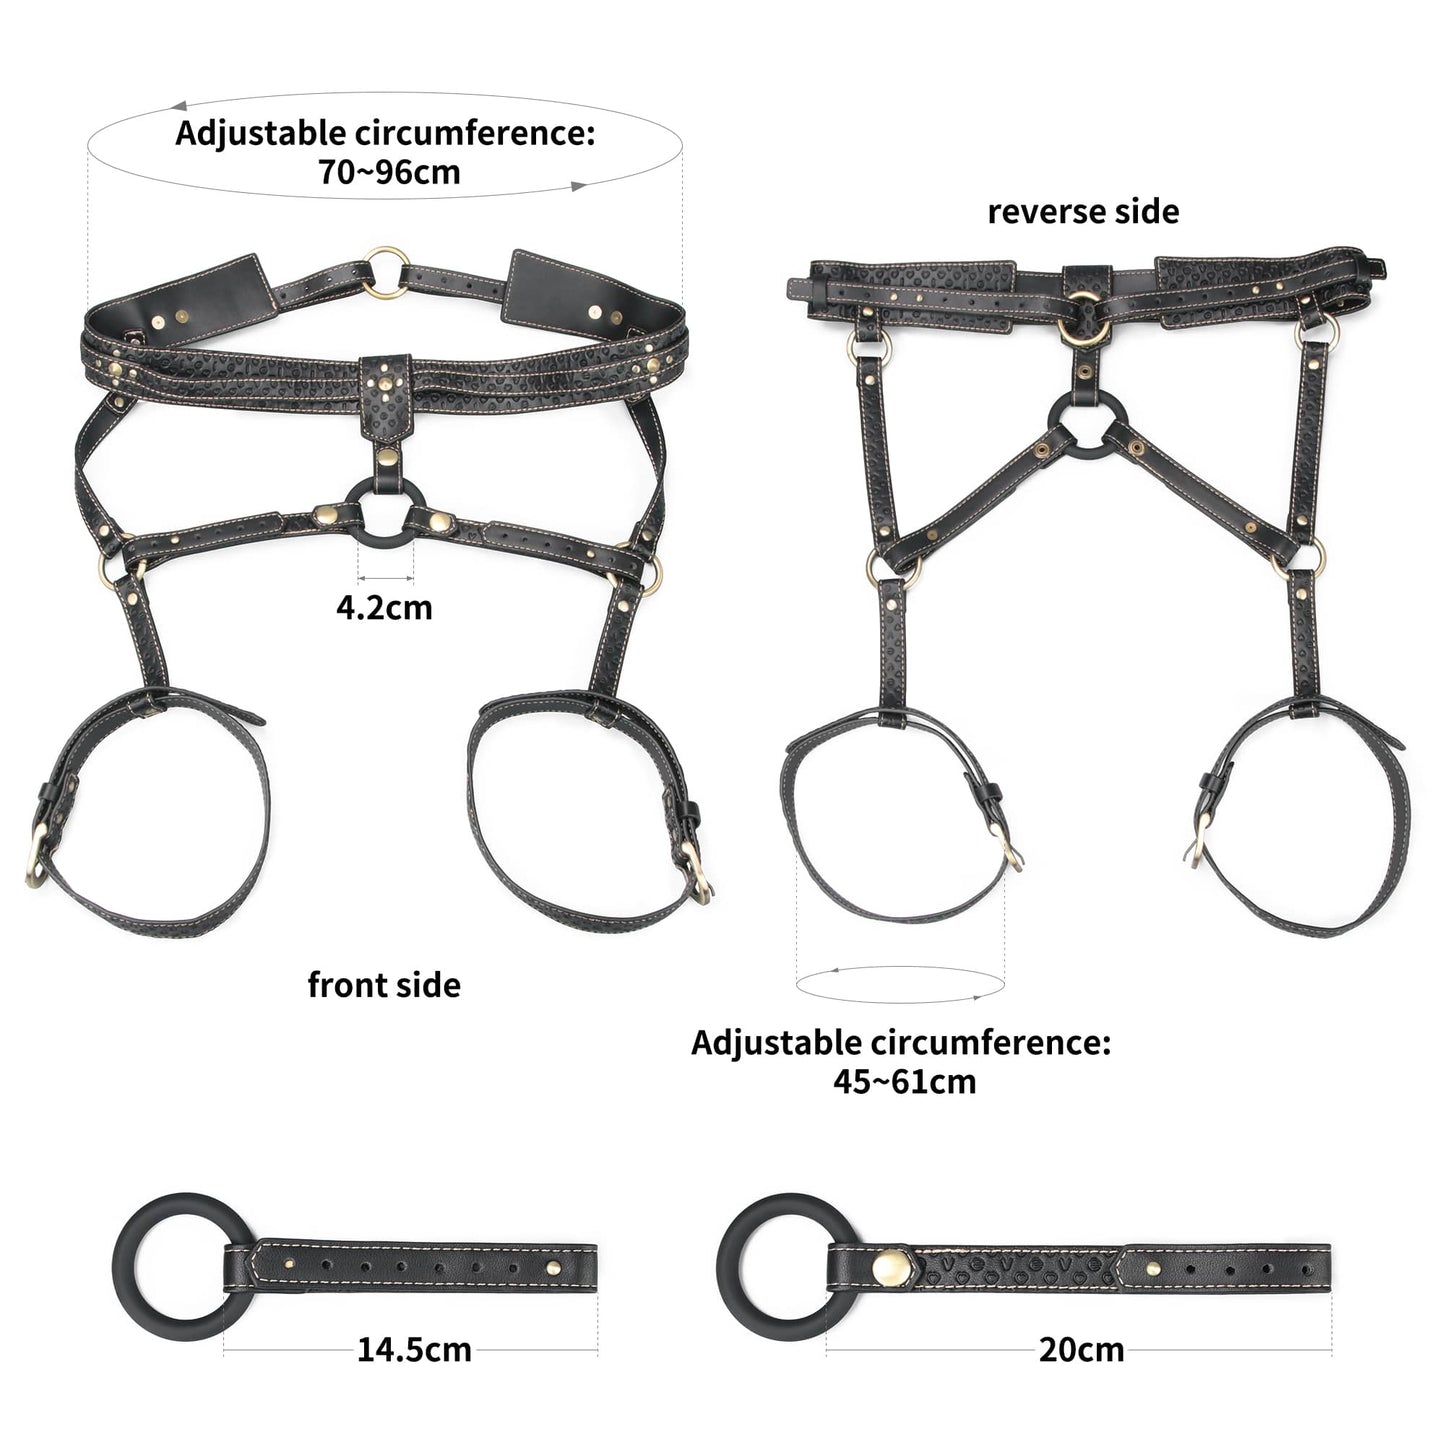 The size of the lower body of the rebellion reign full body harness